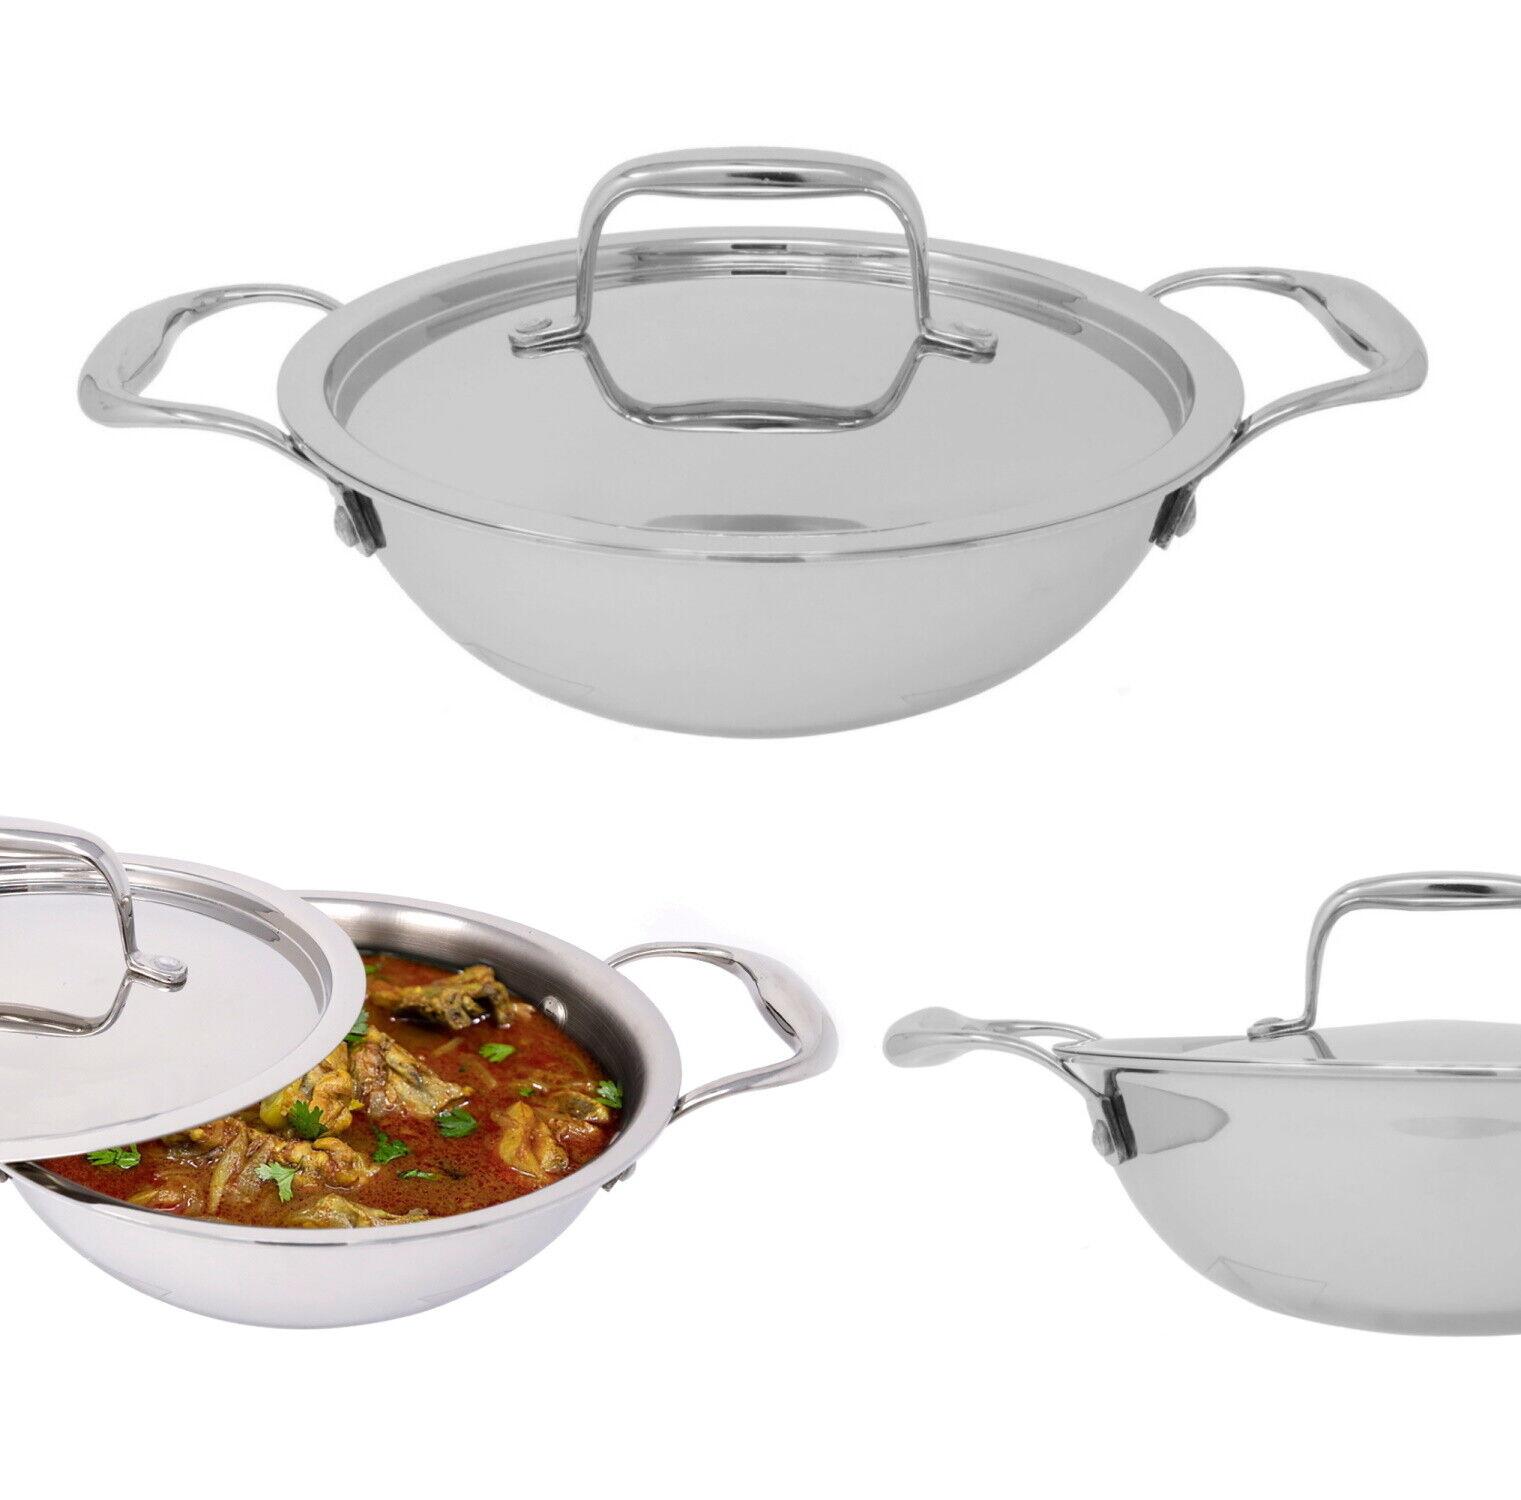 Details about   Induction Base Stainless Steel Wok With Steel Lid 28 cm Dia Cooking Frying Kadai 